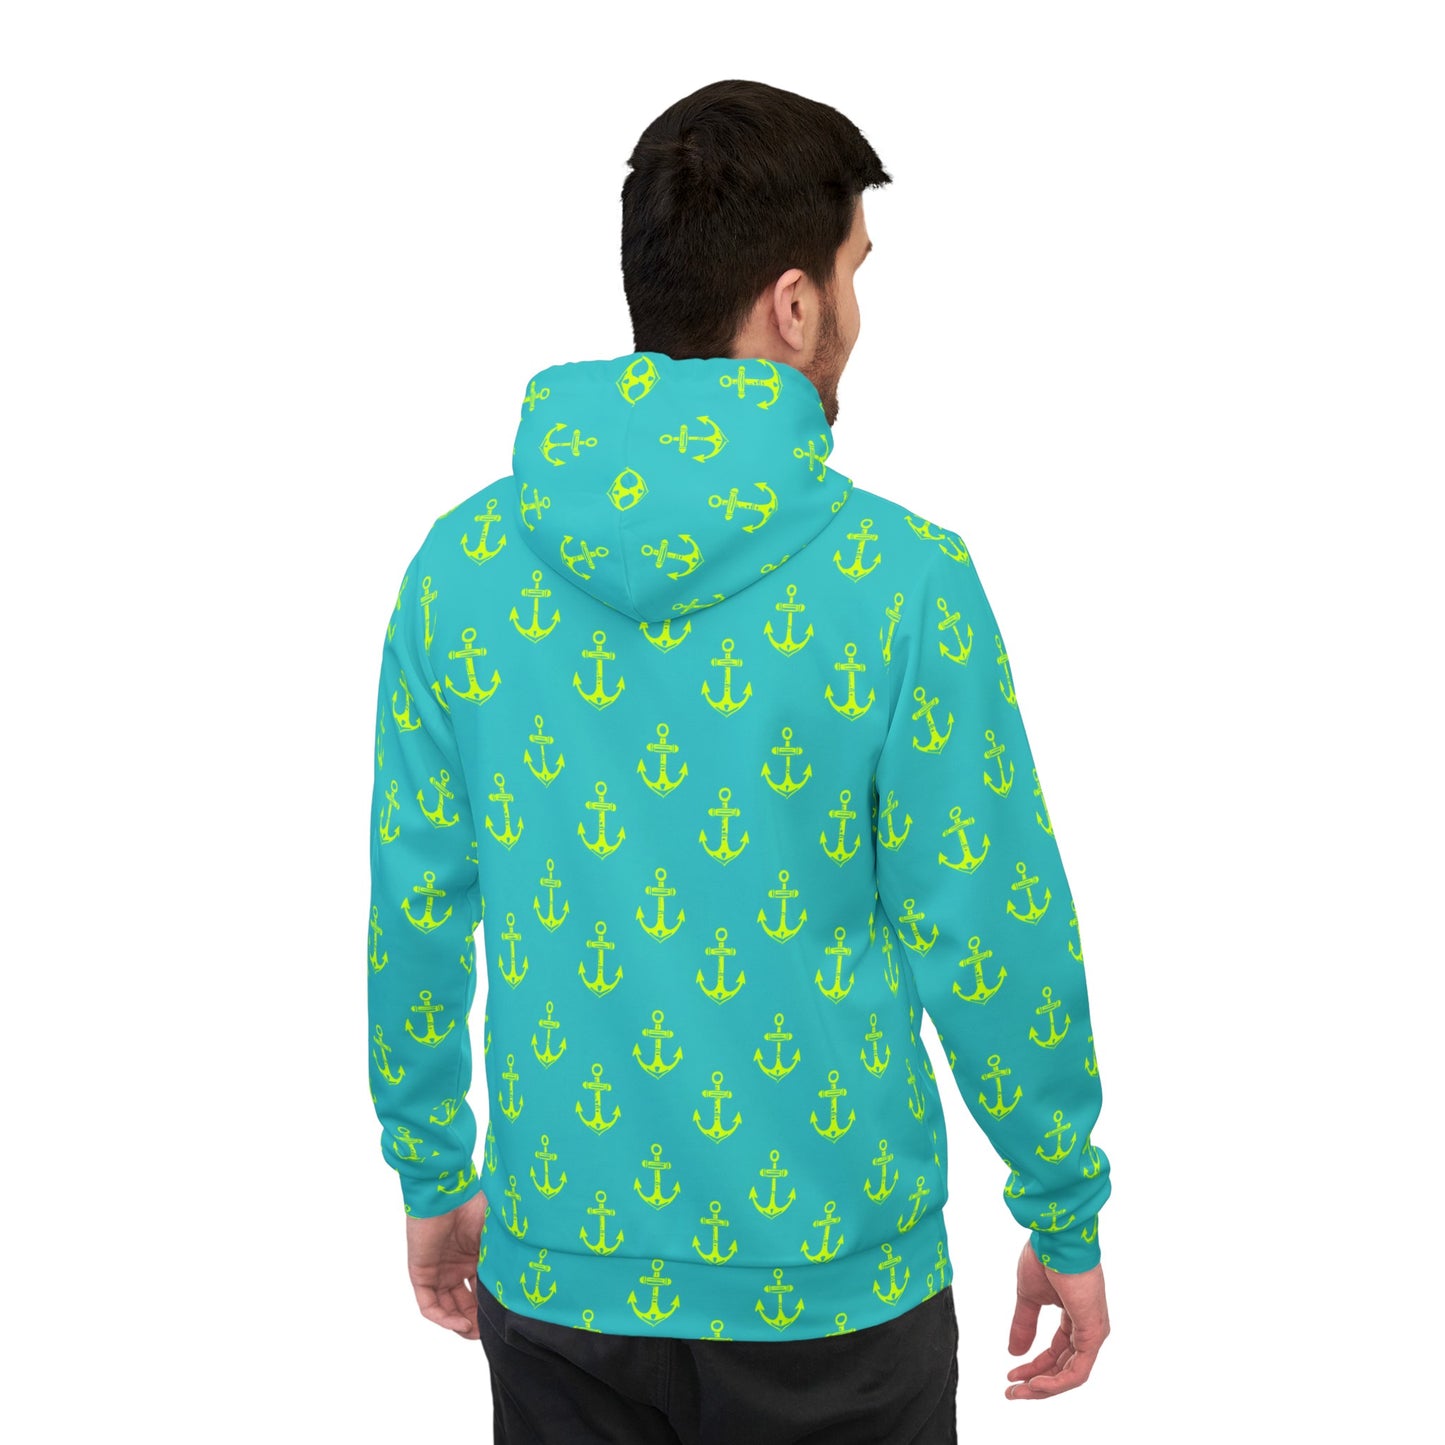 Anchors Away Mascot Surface Beach Volleyball Club Sublimated Designer Athletic Hoodie